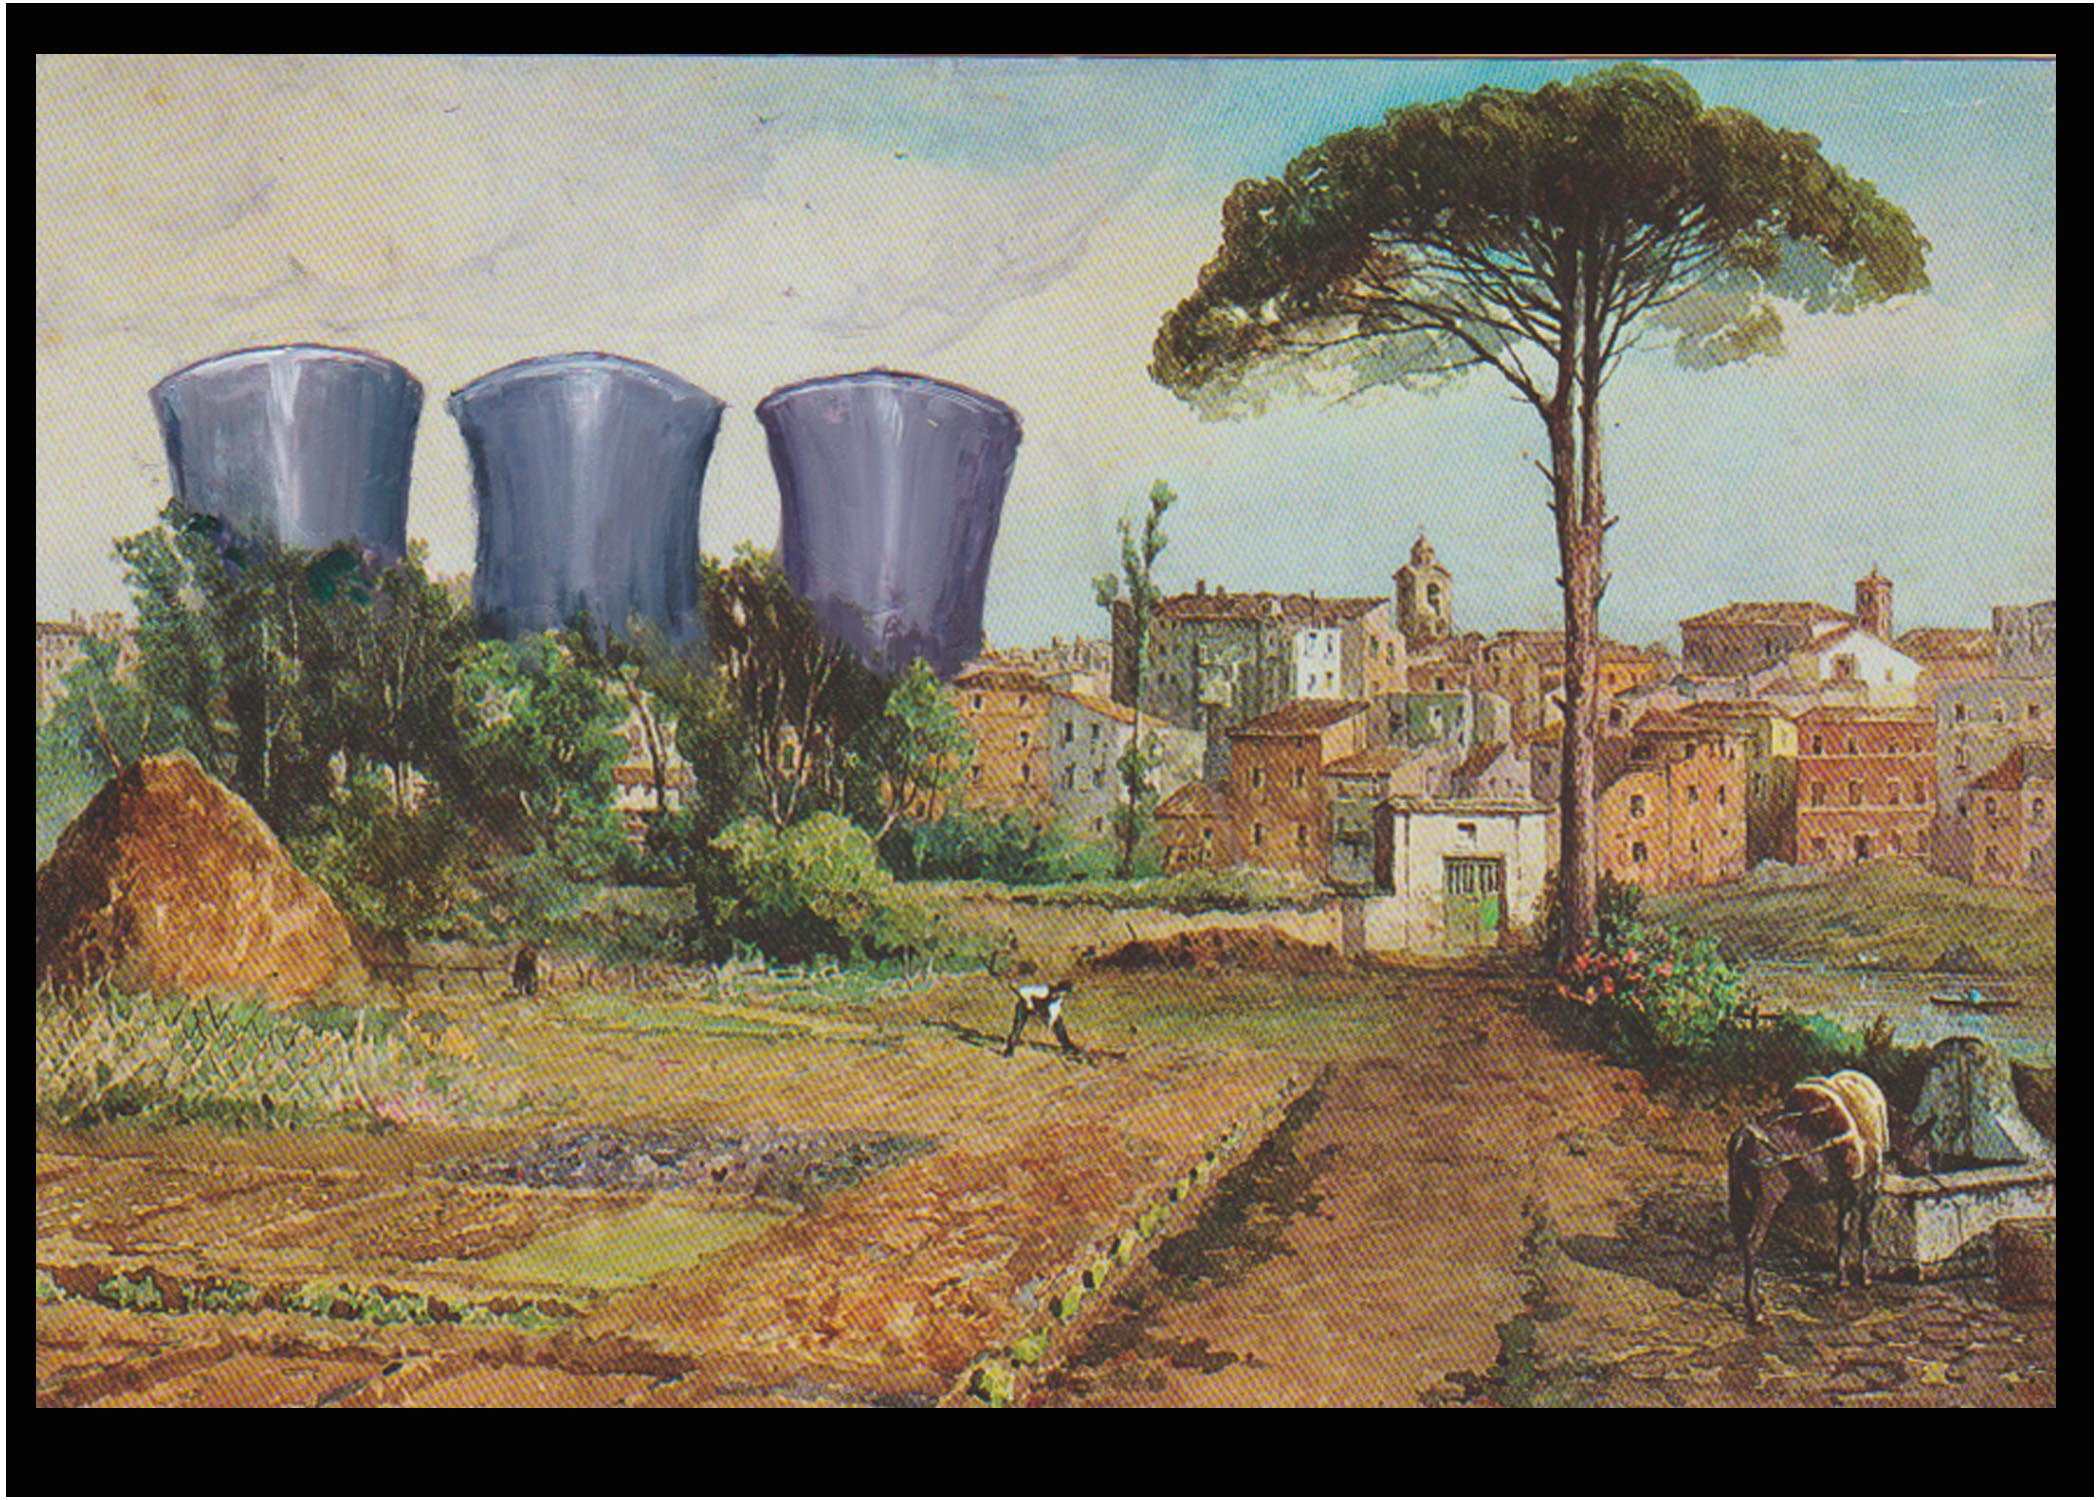 Postcard Intervention: Cooling Towers